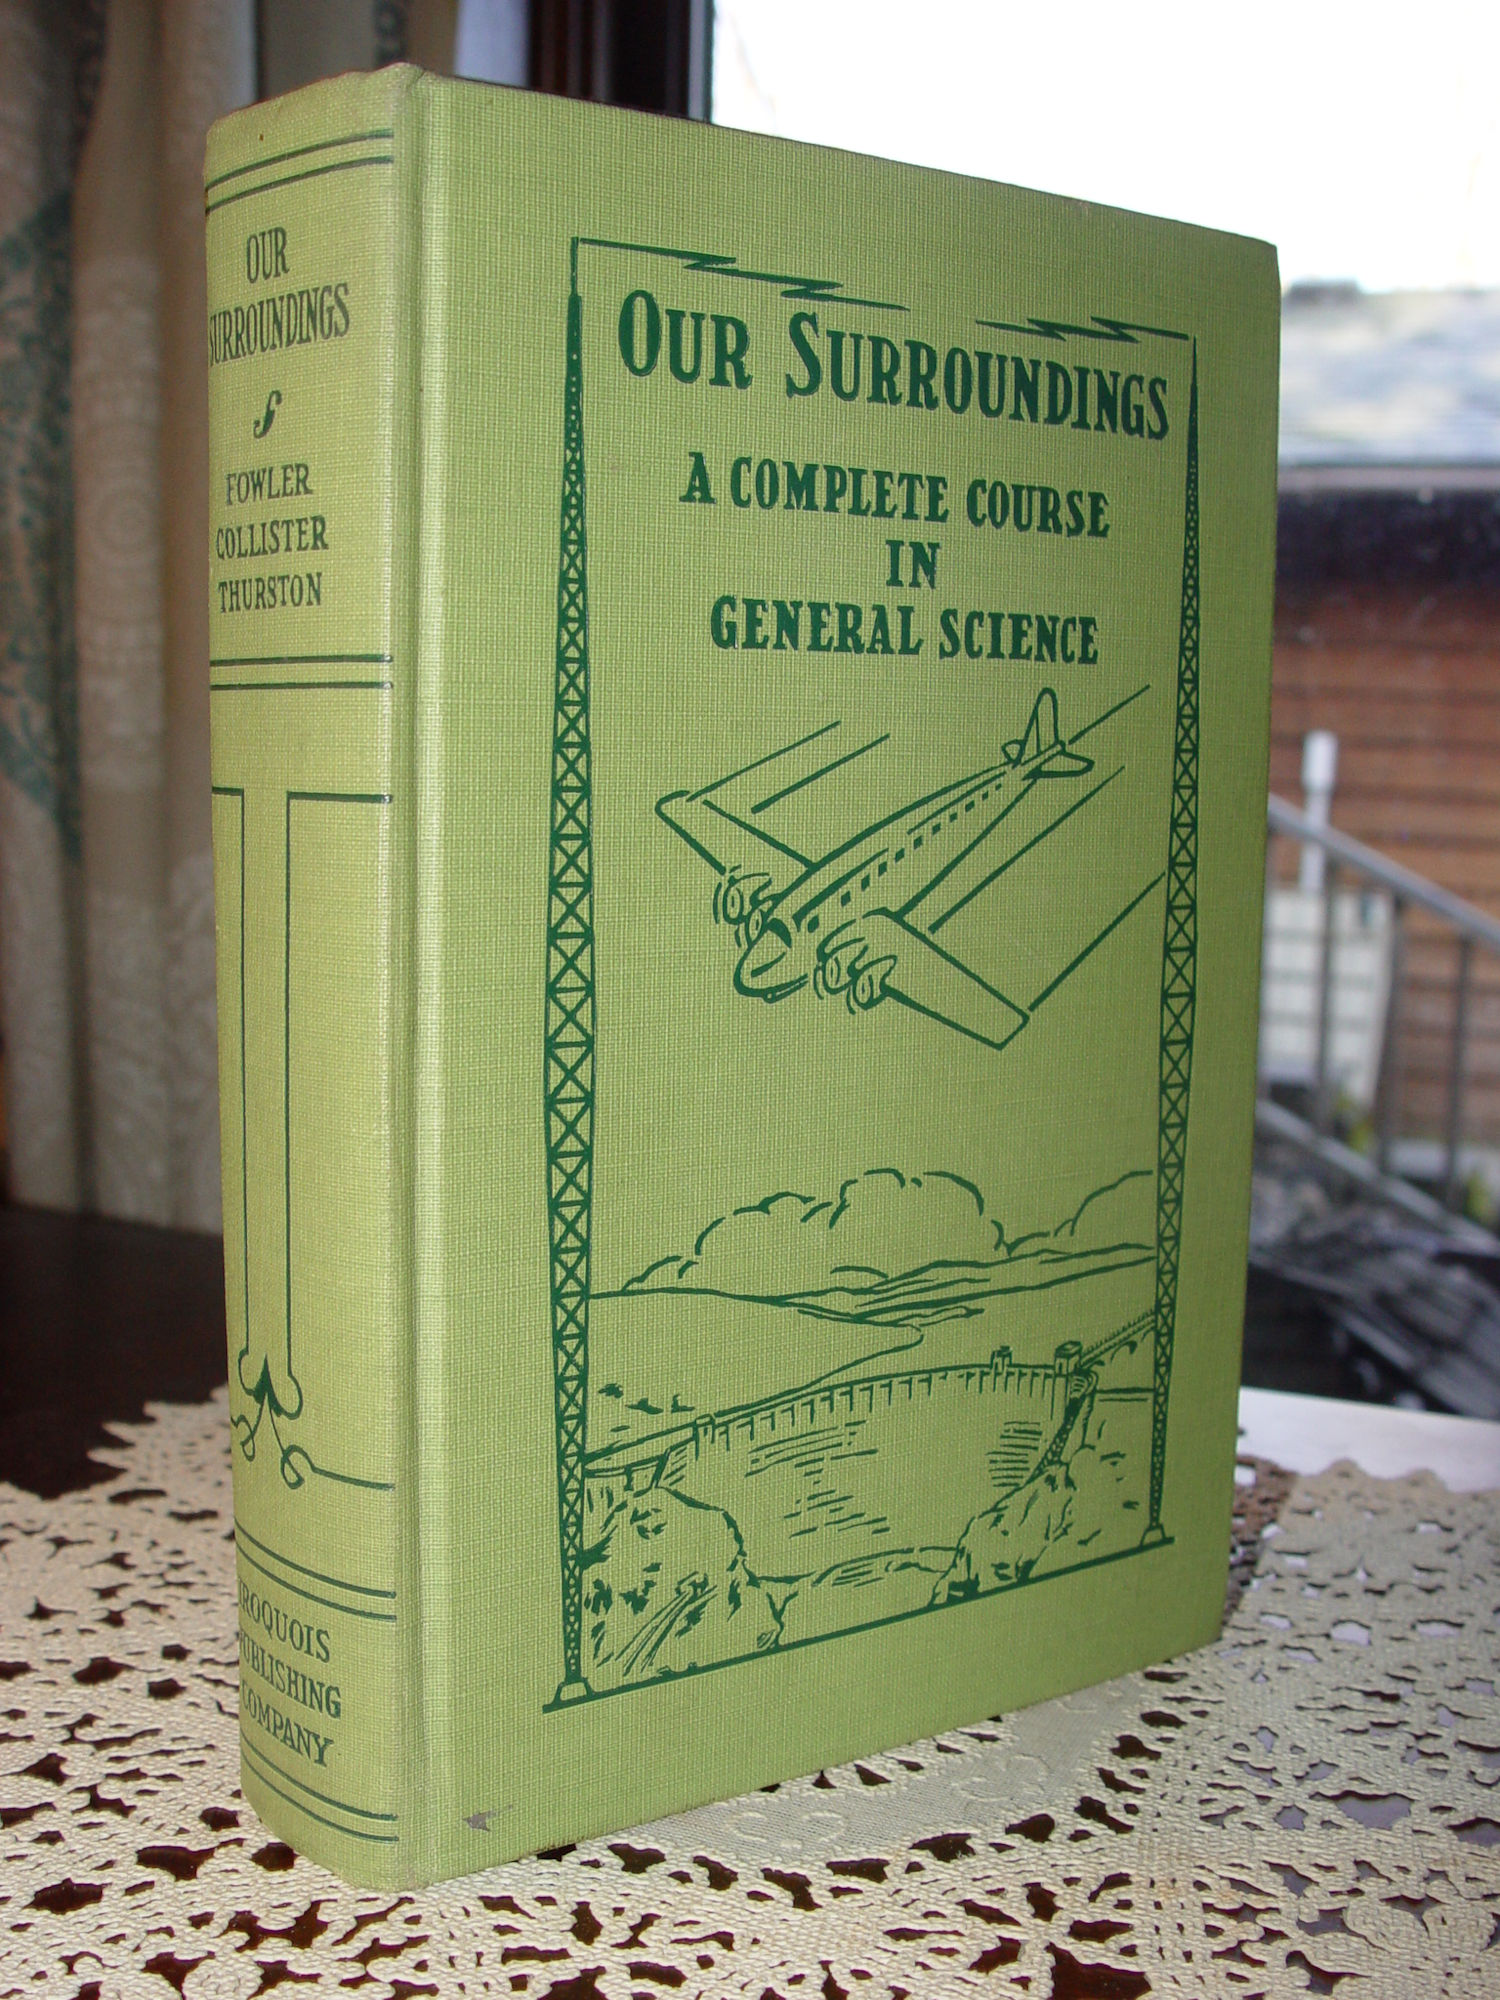 Our Surroundings: A Complete General
                        Science 1943 Fowler, Collister, Thurston